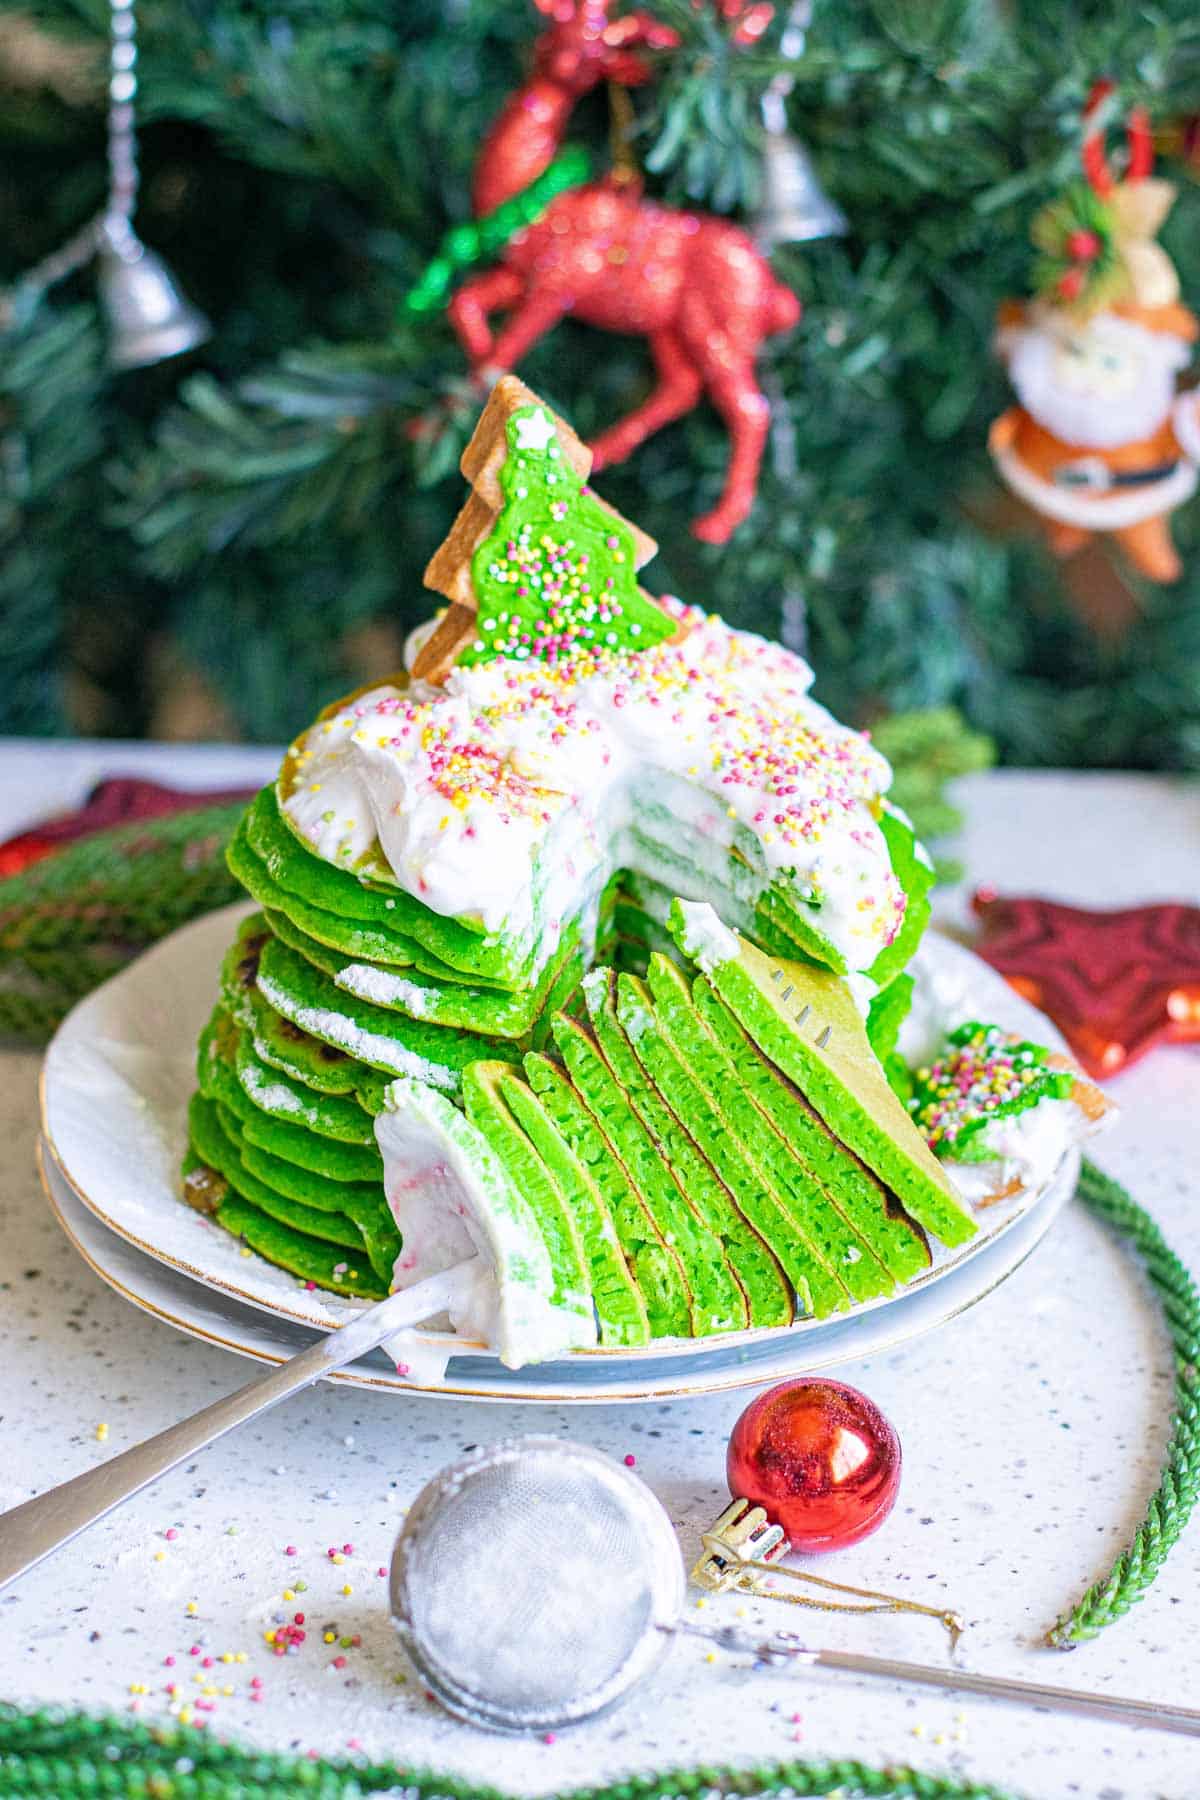 A wedge of green pancakes on a fork with the whole stack behind them.